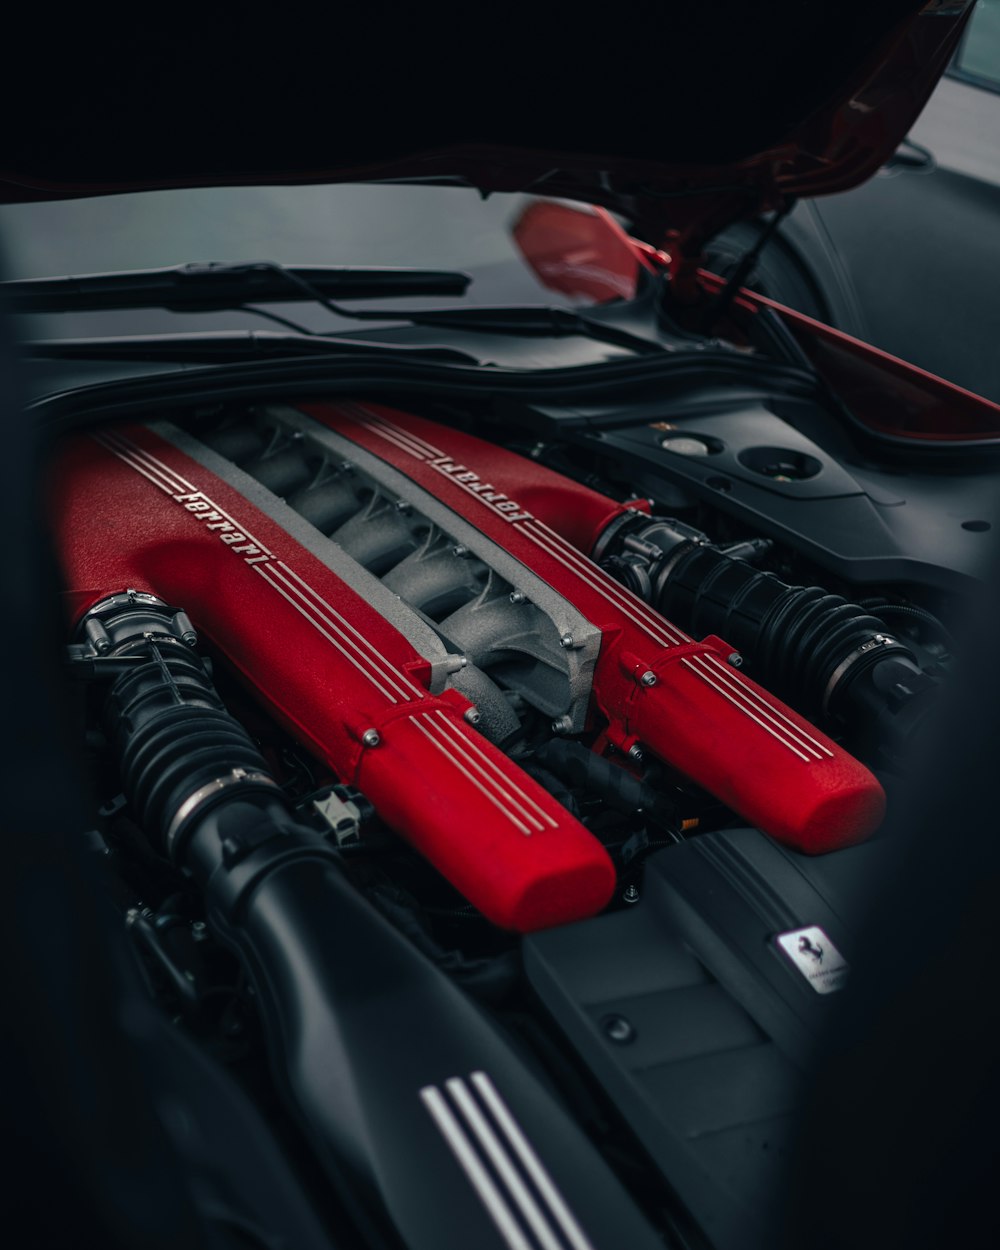 the engine compartment of a car with a red engine cover